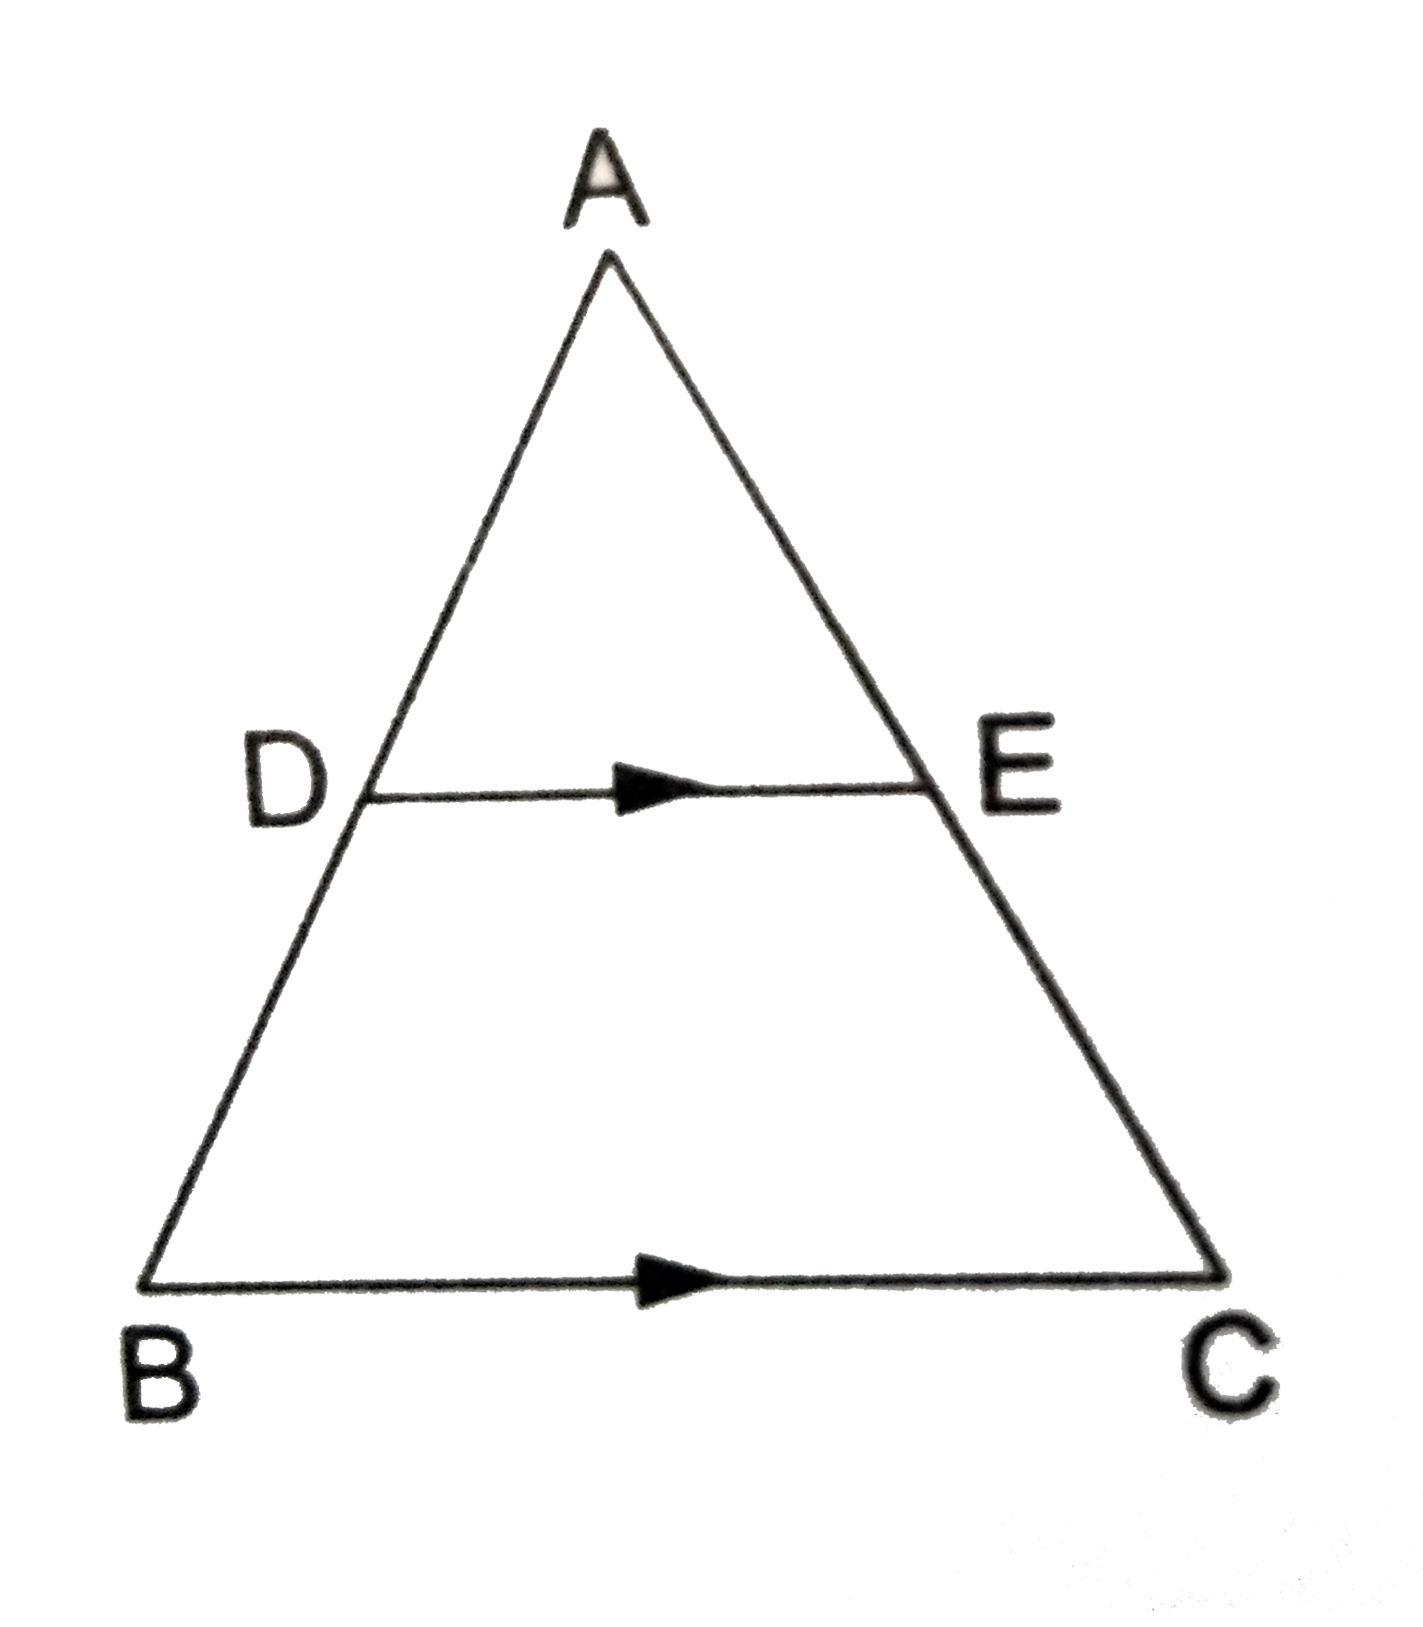 In the given figure, DE|||BC,AD=2cm, BD=2.5 cm, AE= 3.2cm and DE=4 cm. Find AC and BC.